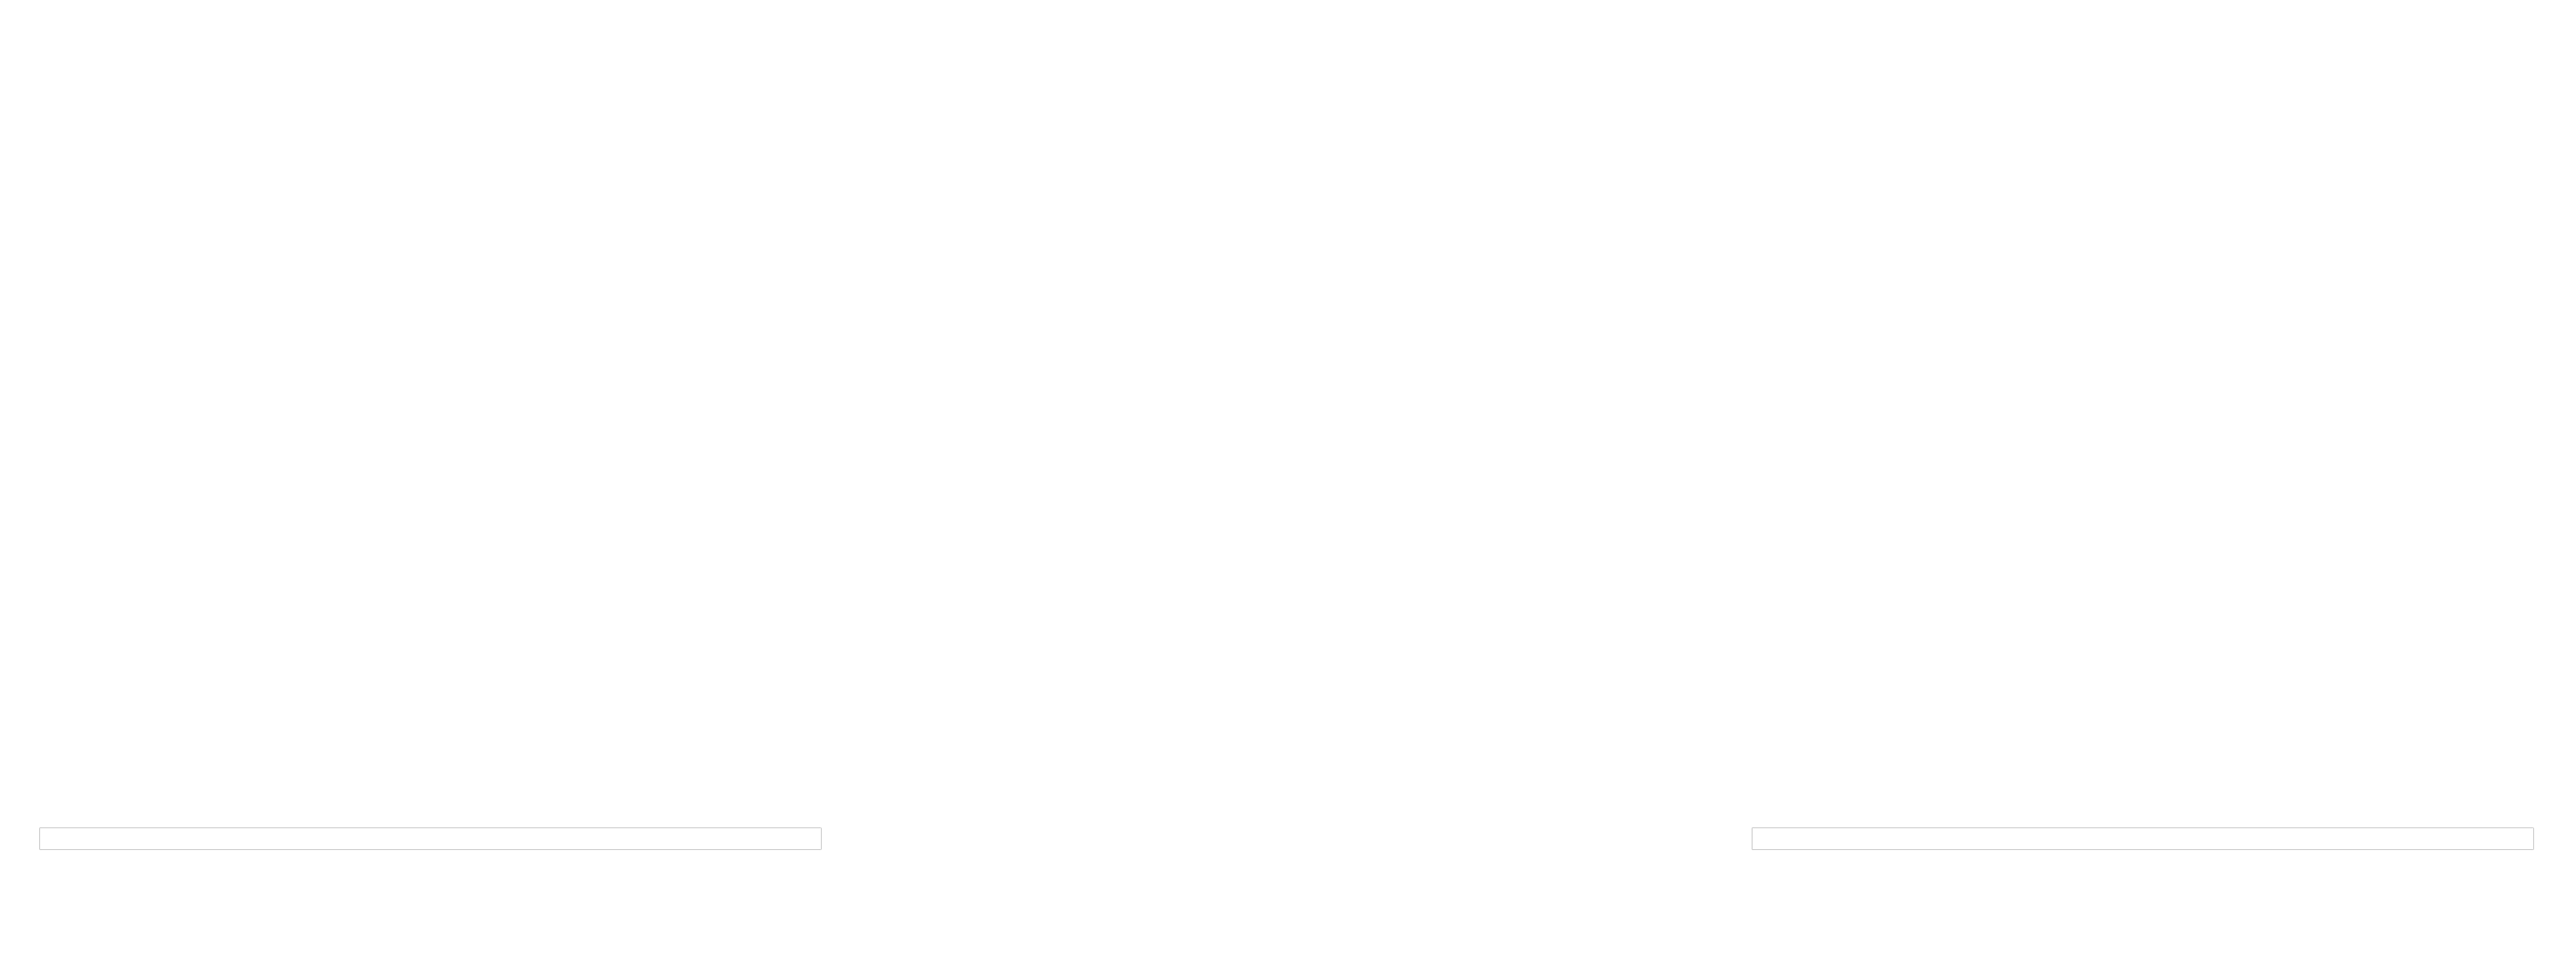 The Champagne & Gift Company Logo